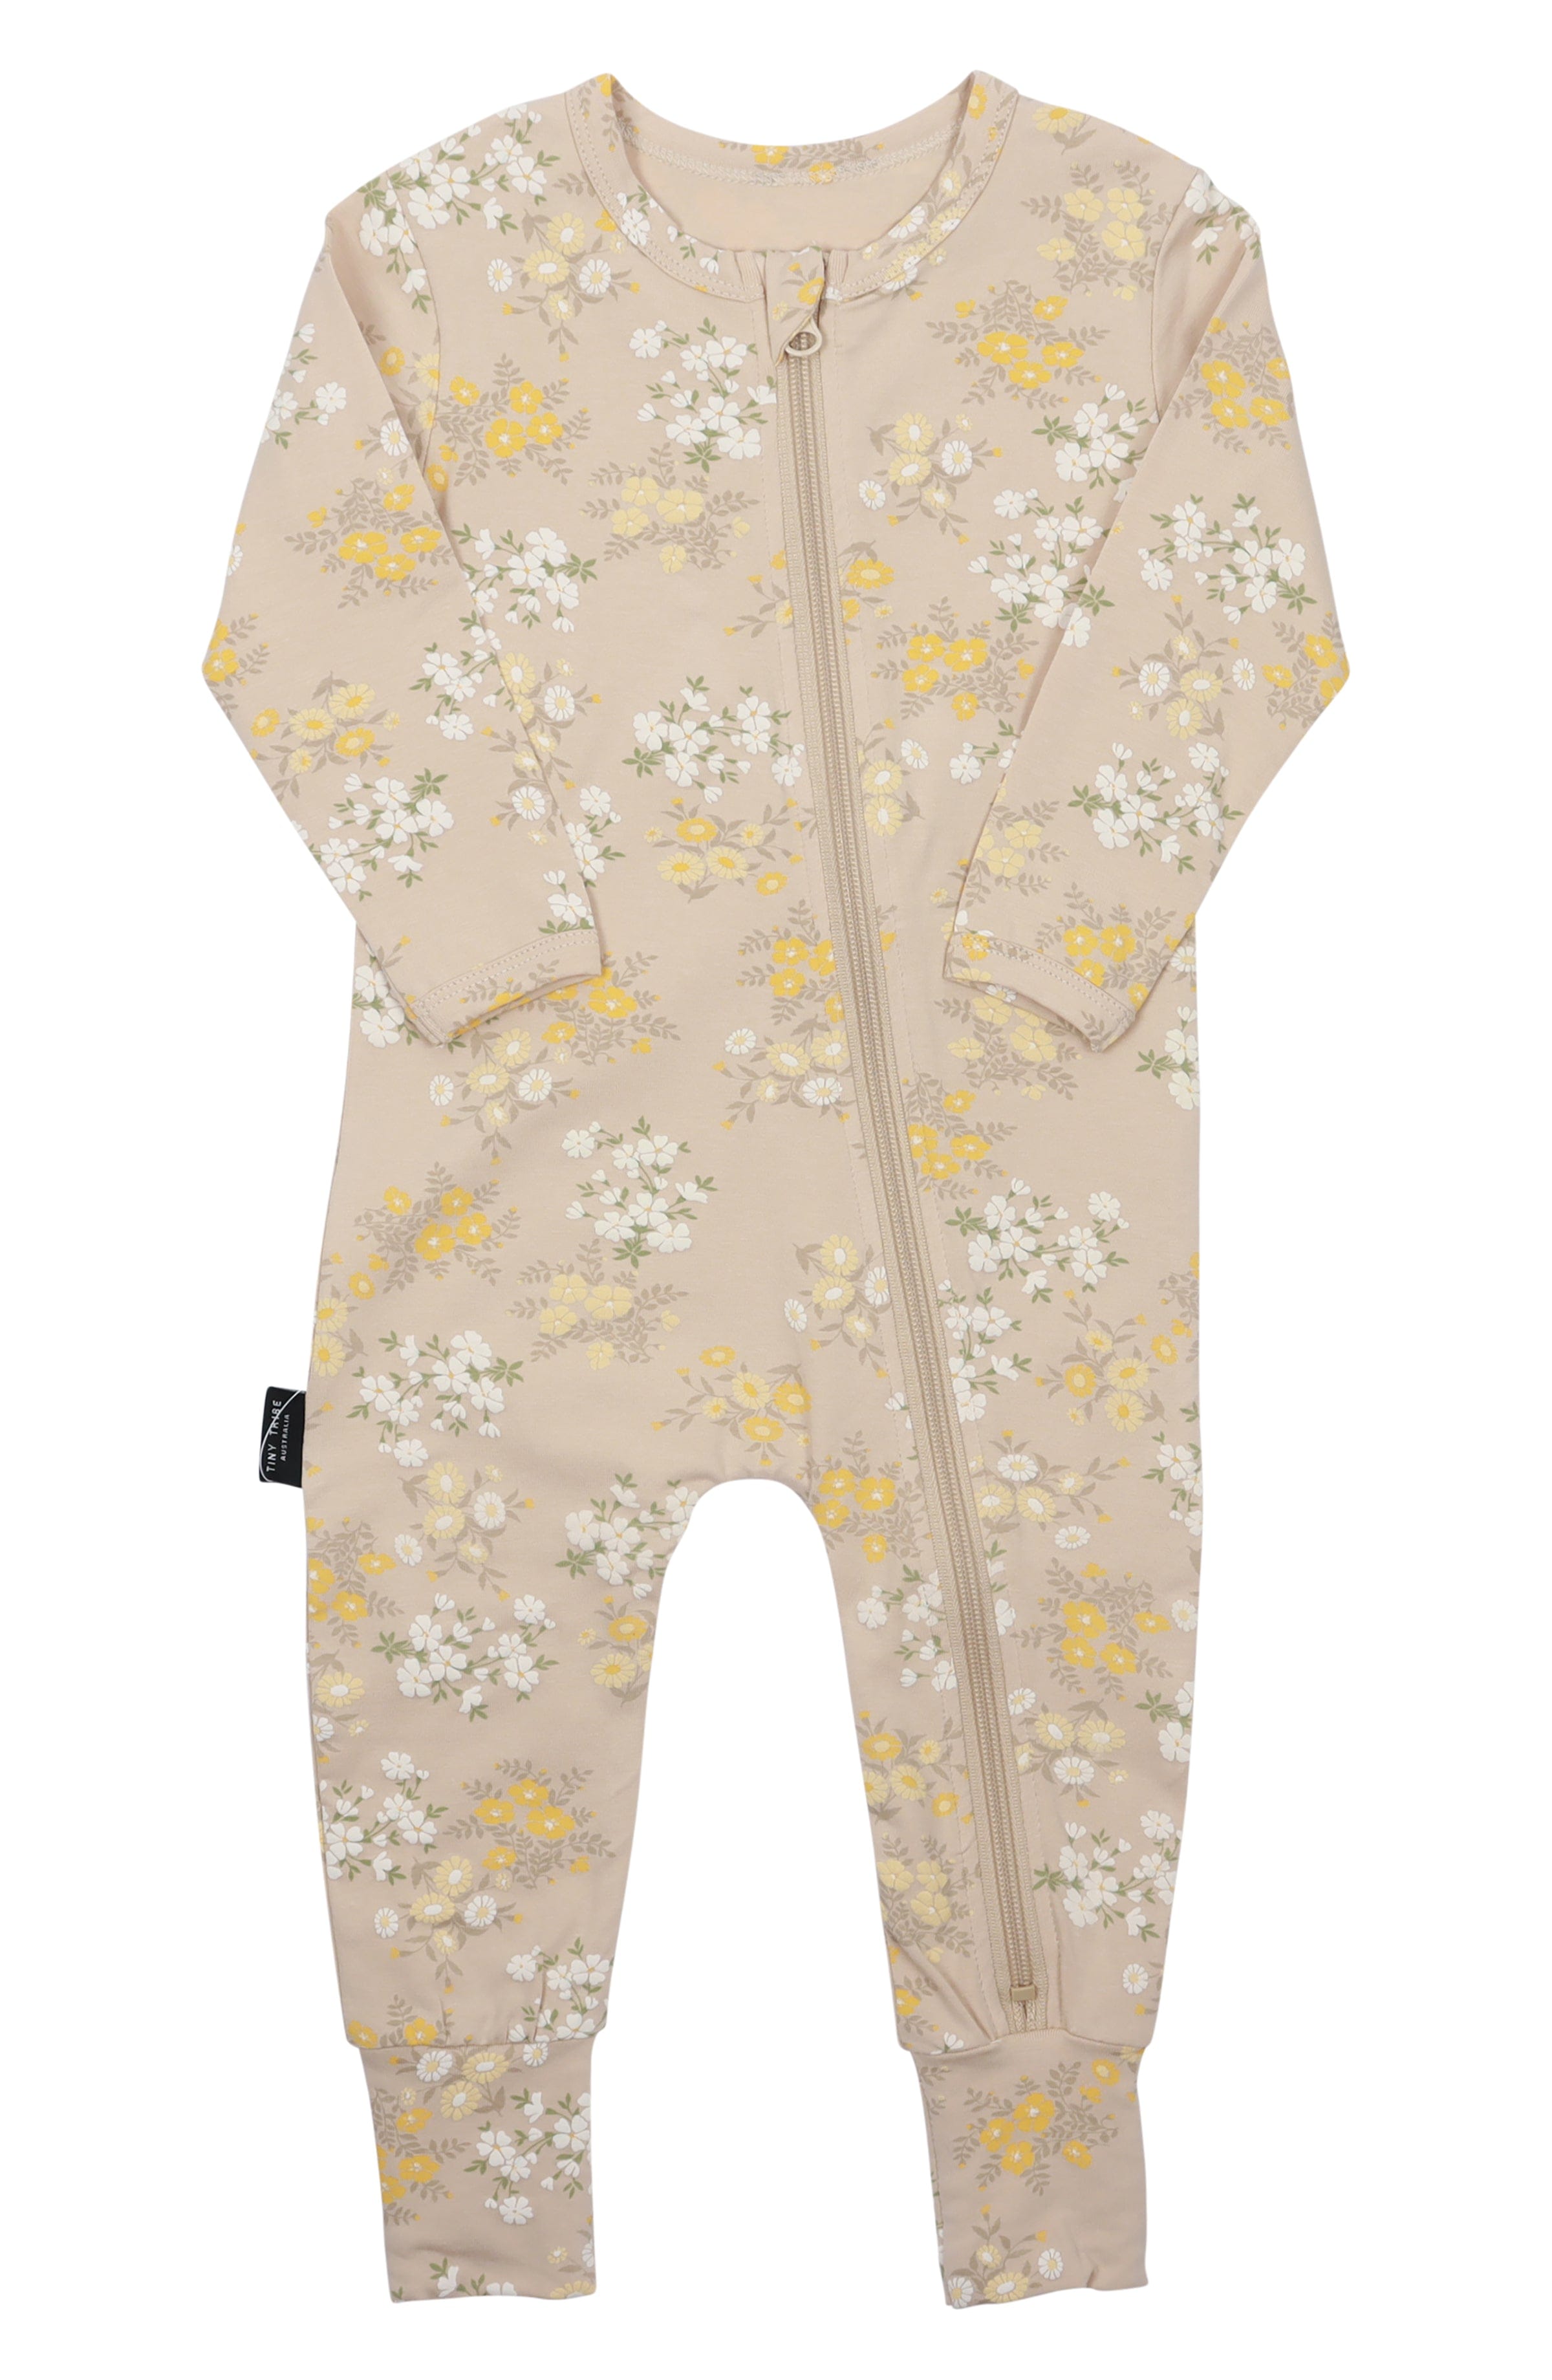 Tiny Tribe Girls All In One Floral Garden Zip Romper w/ Feet